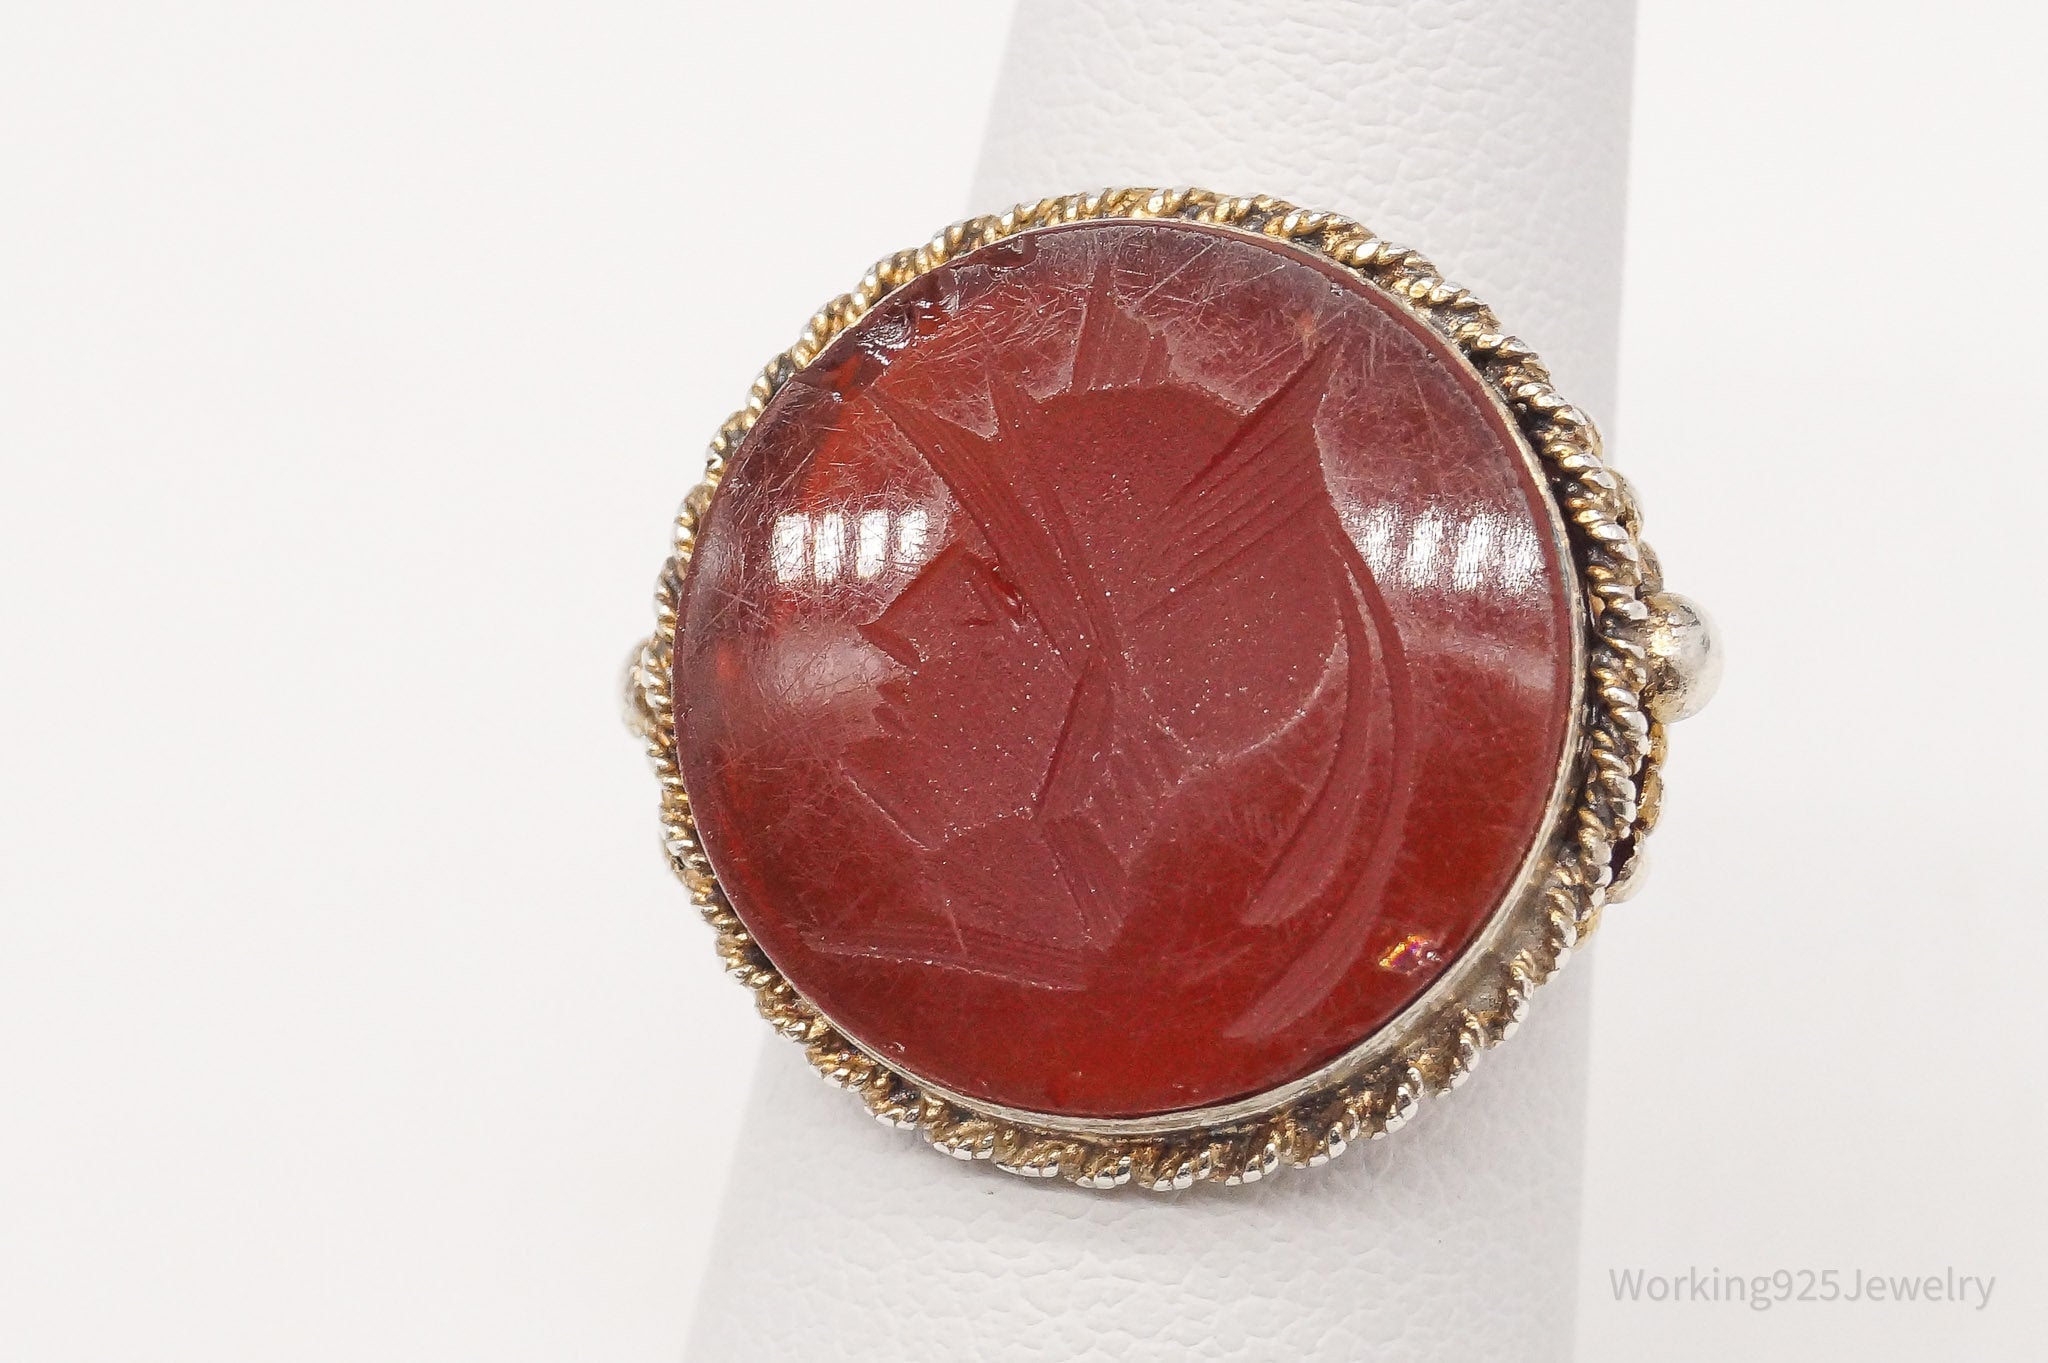 Antique Roman Soldier Carved Carnelian Intaglio Silver Ring - Size 5.5